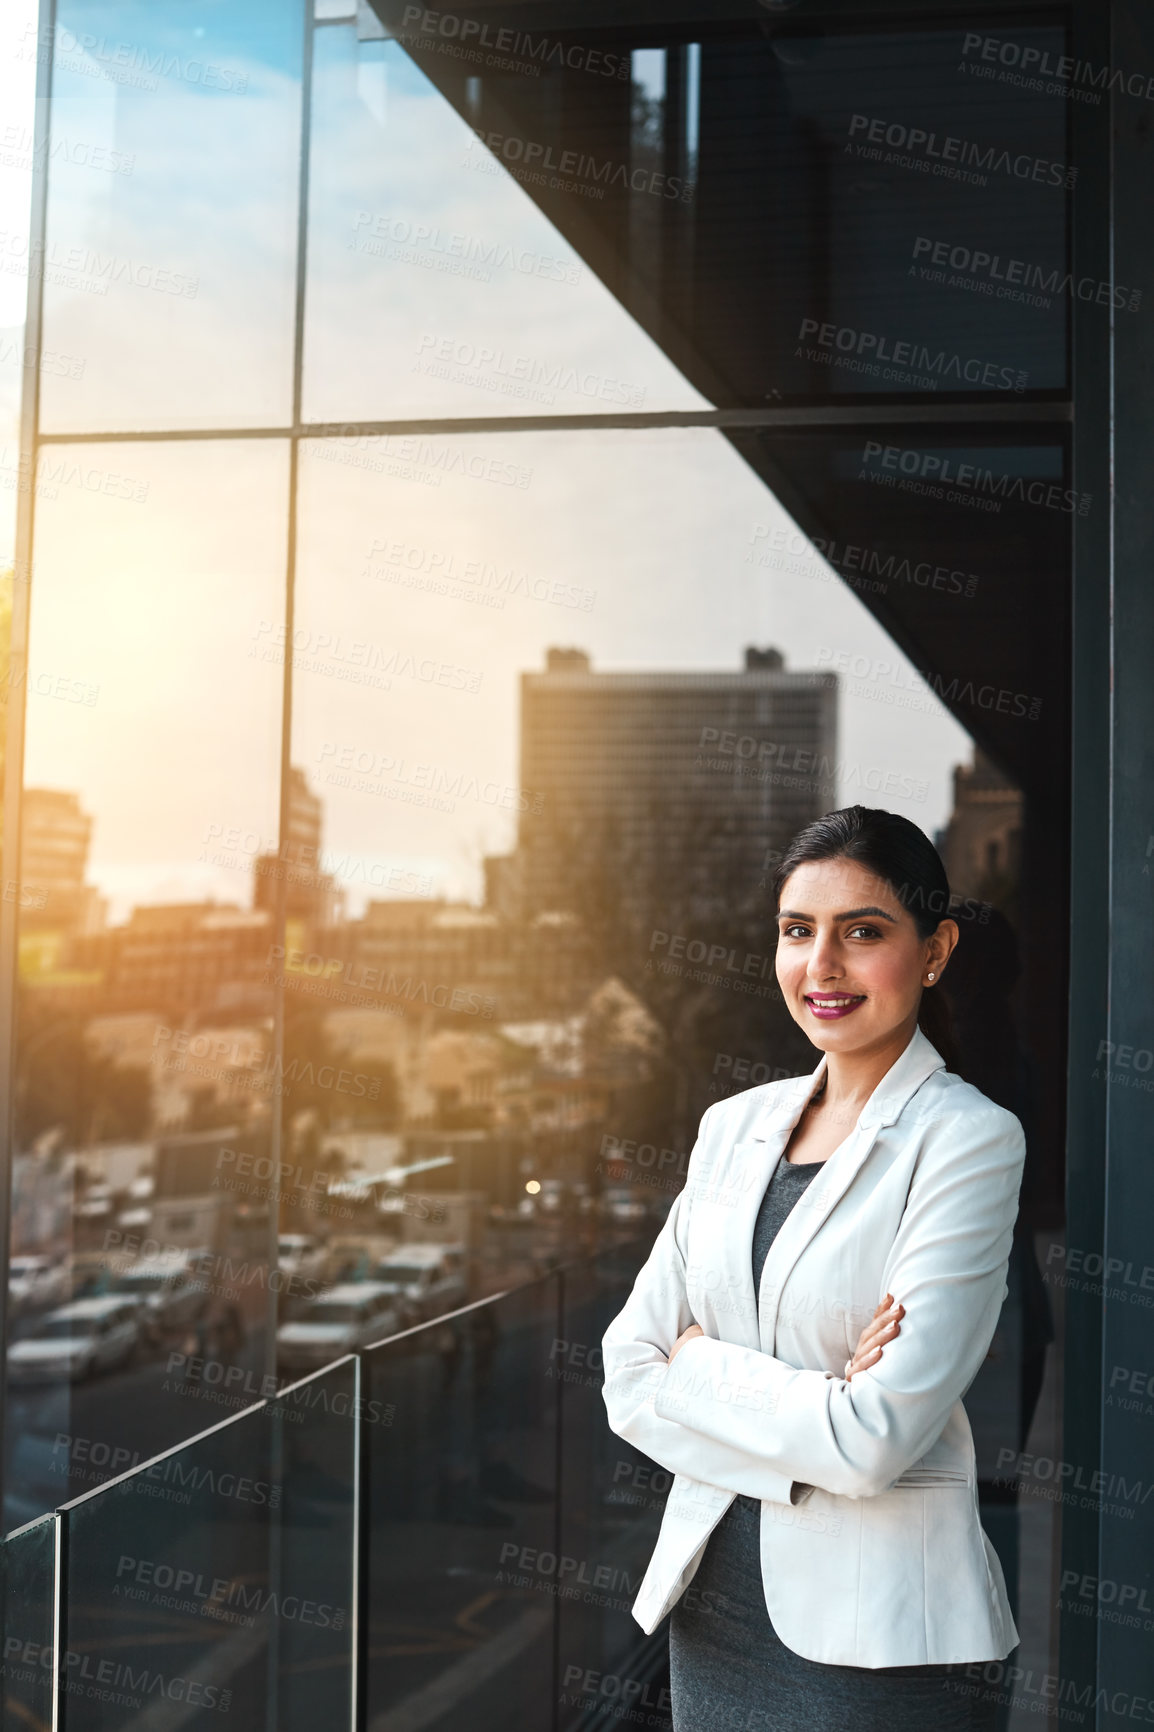 Buy stock photo Portrait of a young businesswoman standing on the office balcony